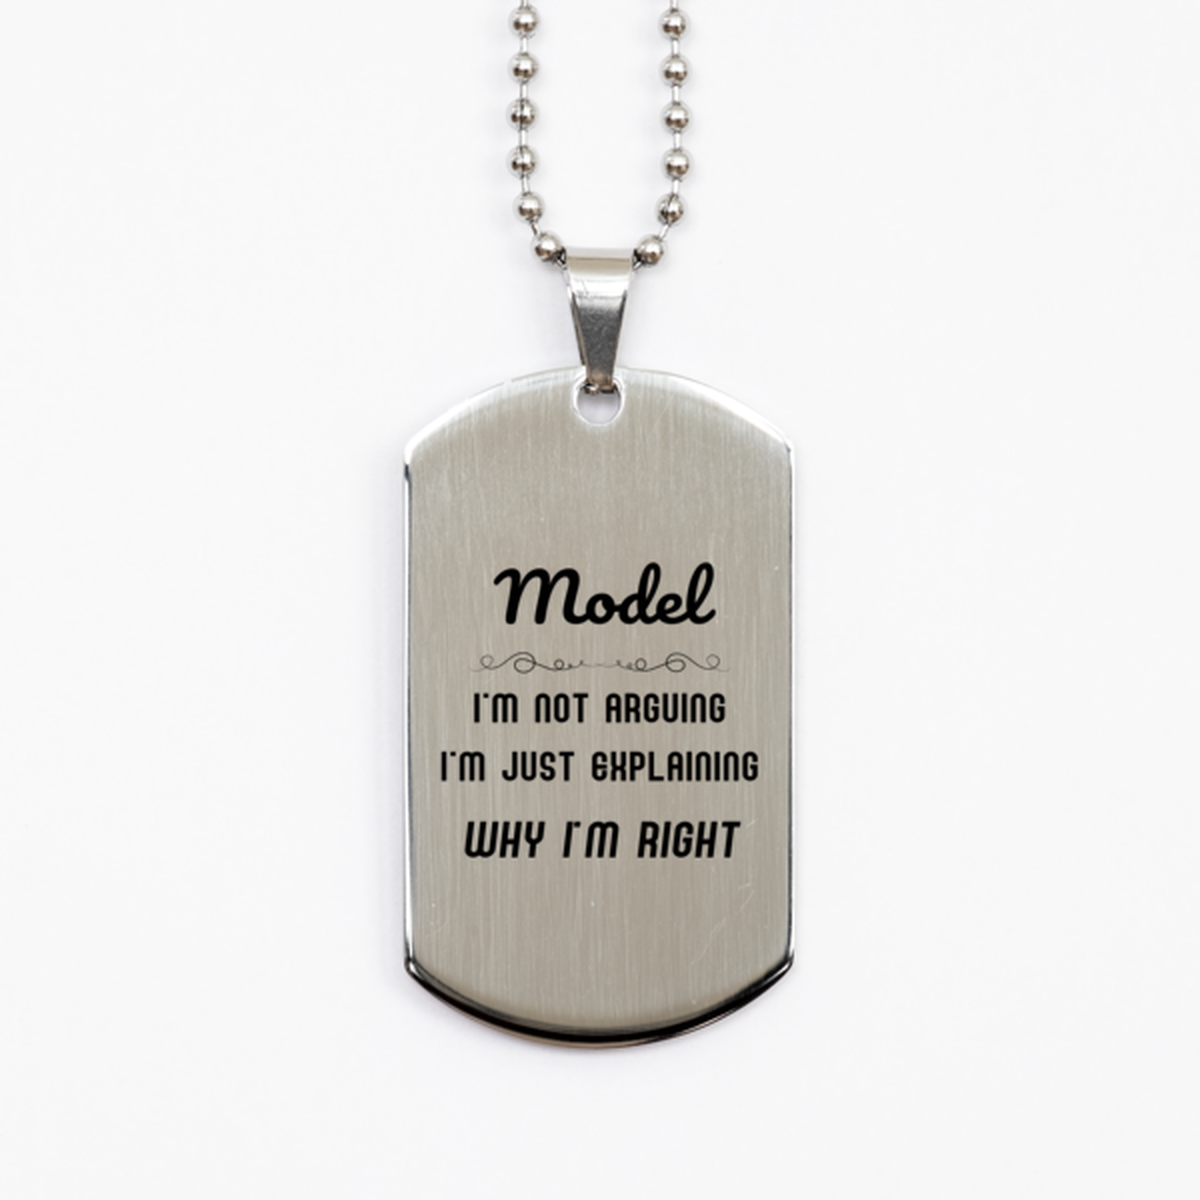 Model I'm not Arguing. I'm Just Explaining Why I'm RIGHT Silver Dog Tag, Funny Saying Quote Model Gifts For Model Graduation Birthday Christmas Gifts for Men Women Coworker